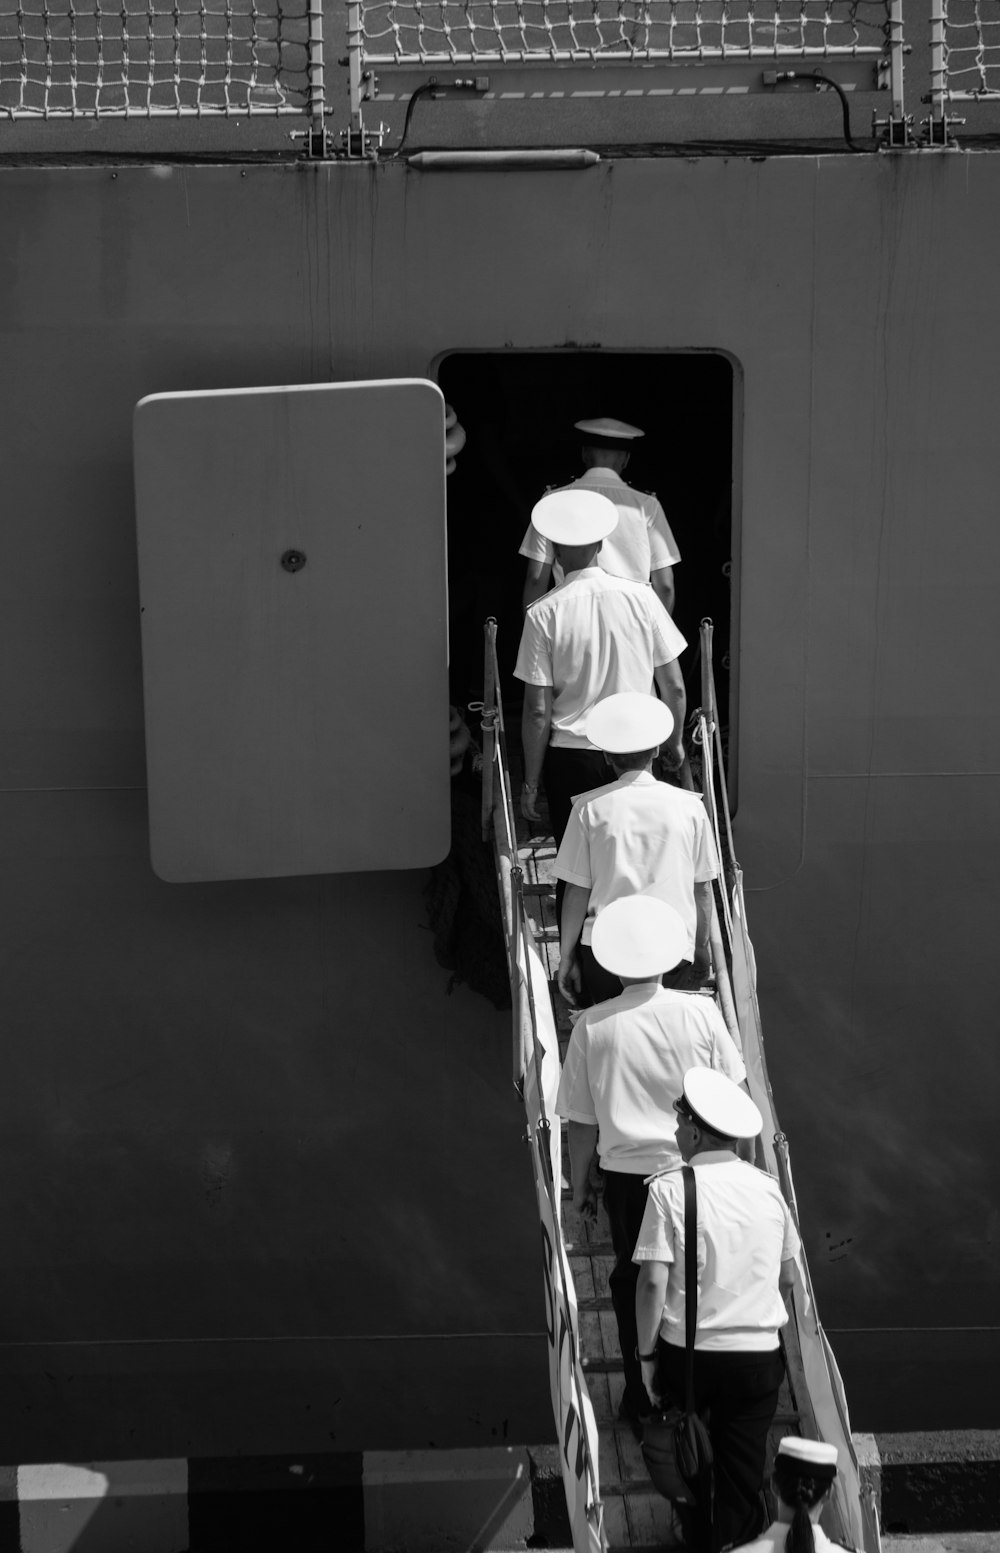 people in uniform climbing on plane stairs in grayscale photography